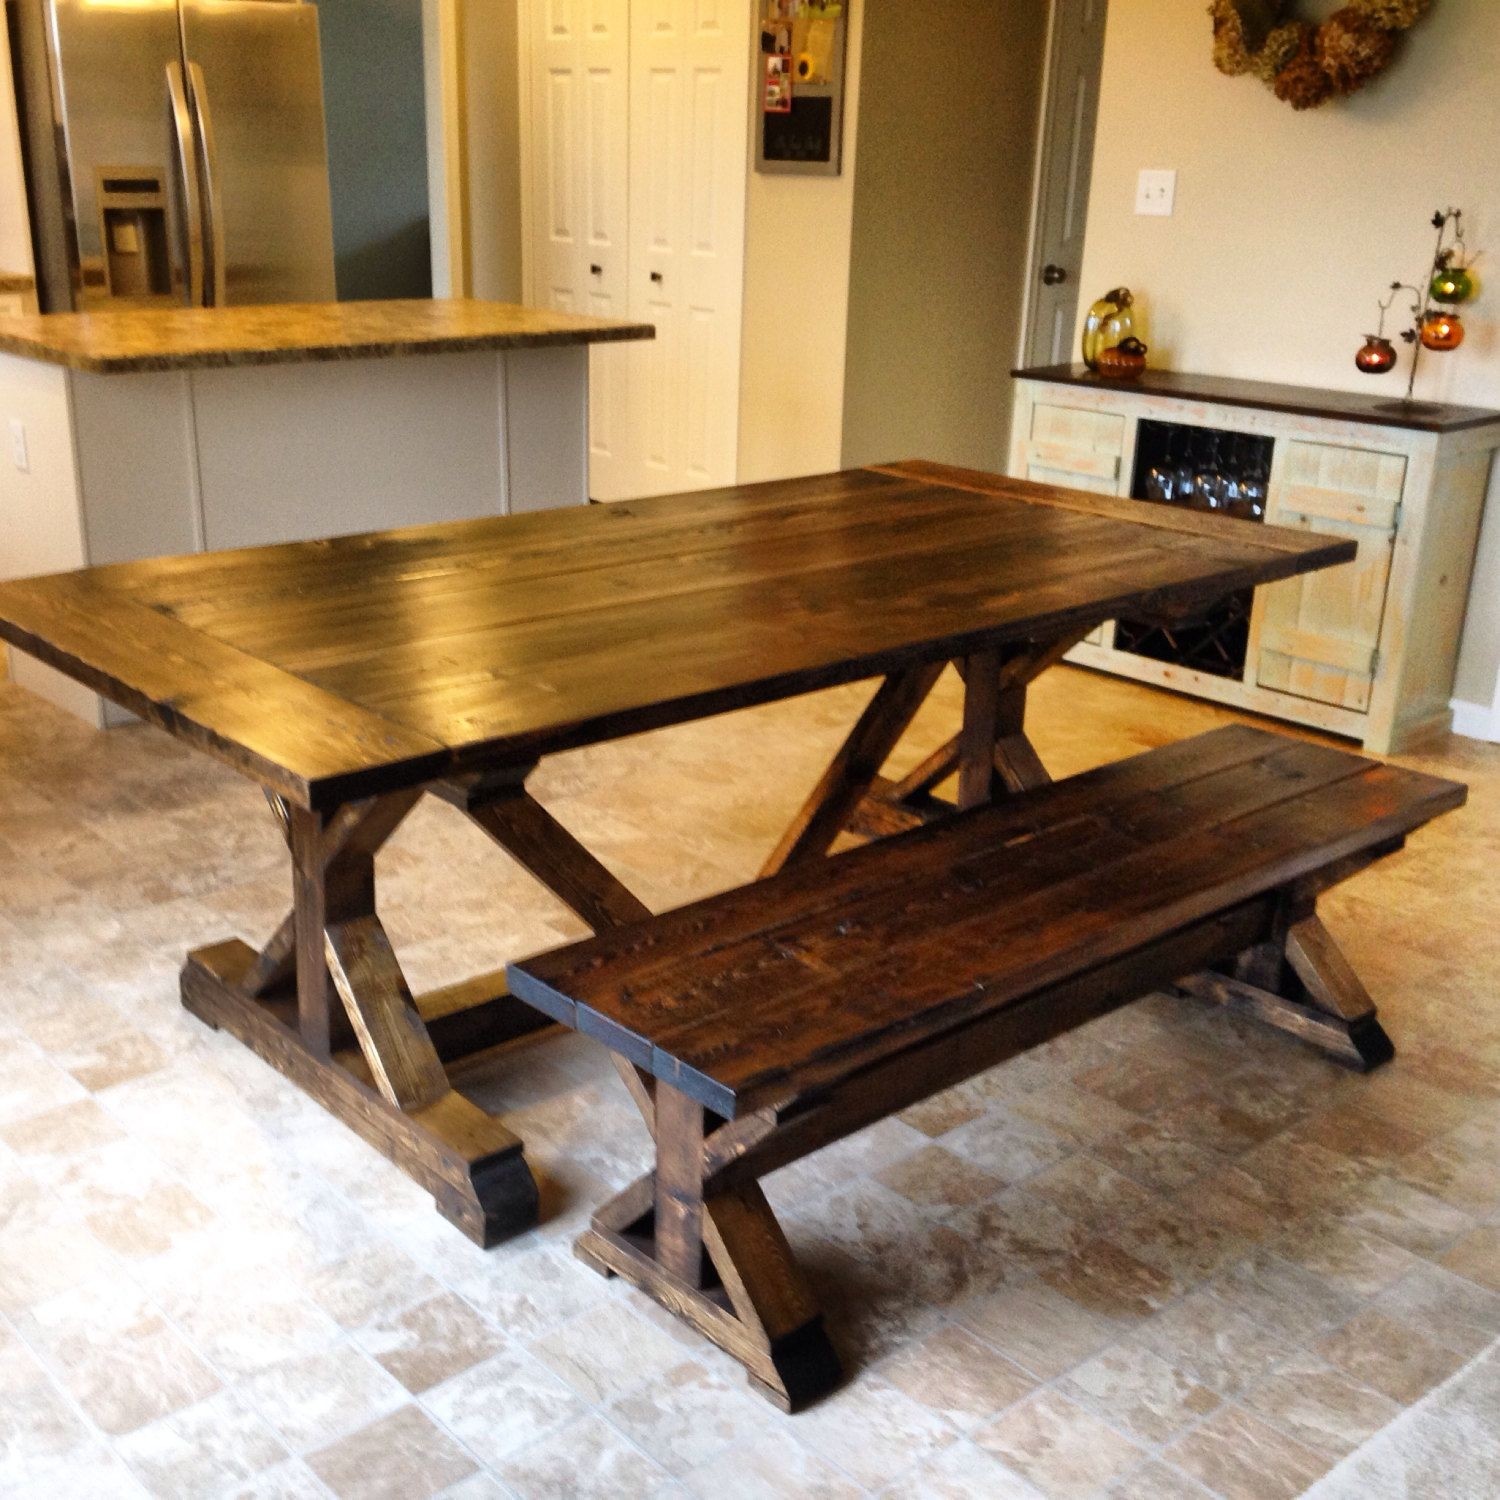 Farmhouse style dining table by midatlanticrustic on etsy